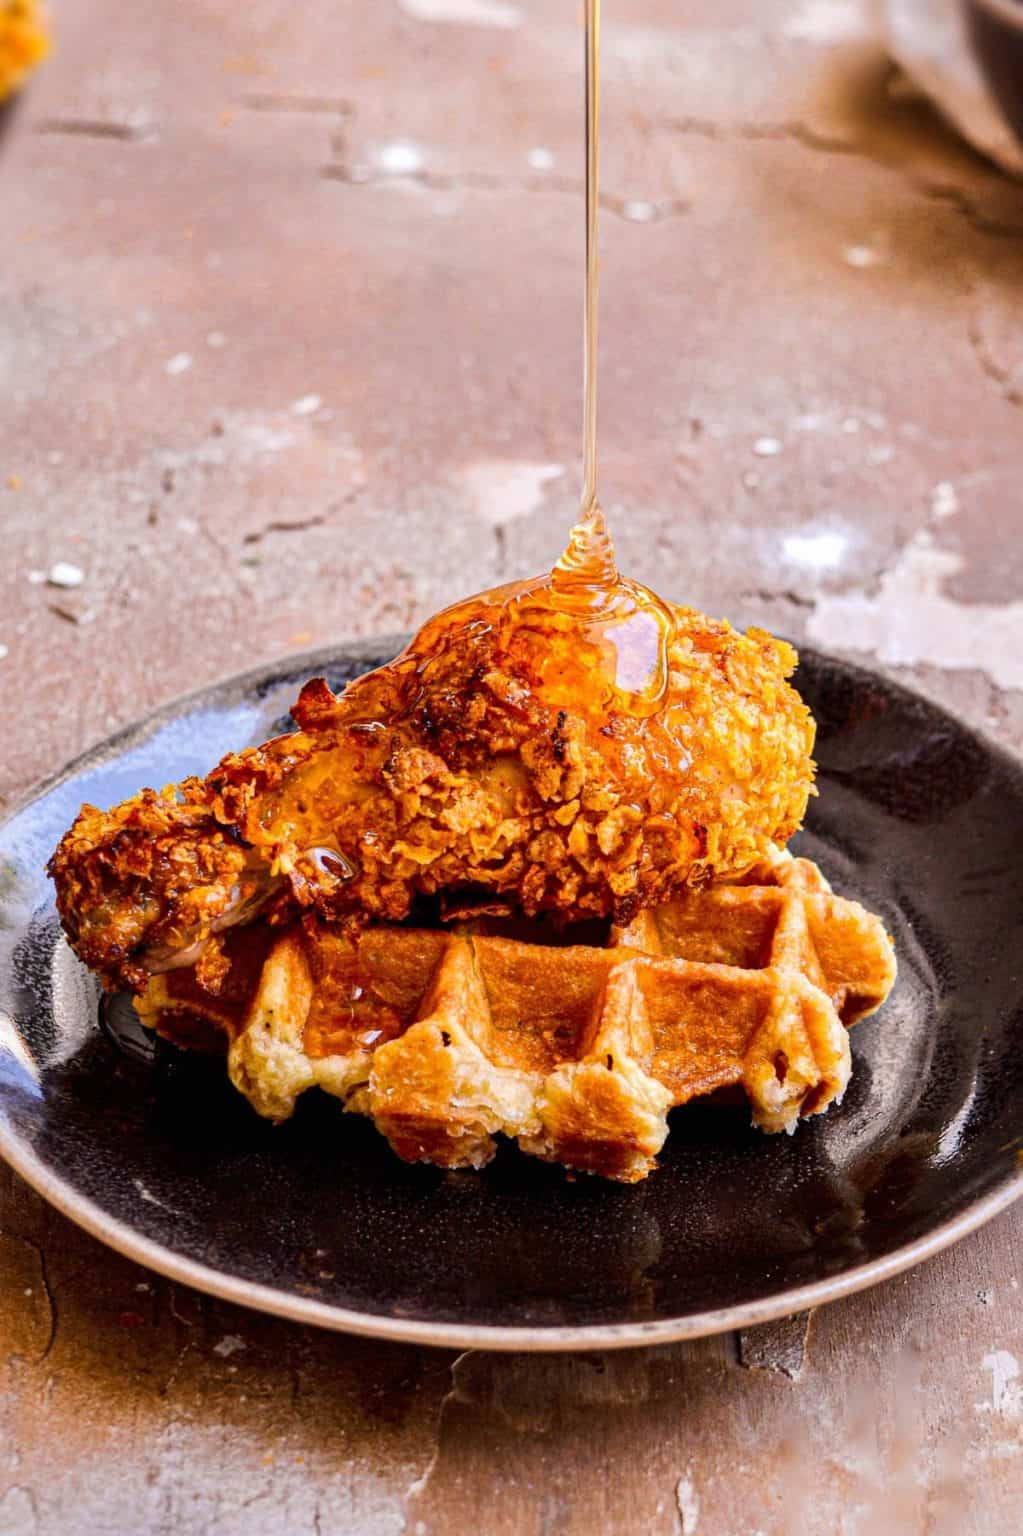 chicken and waffle business plan